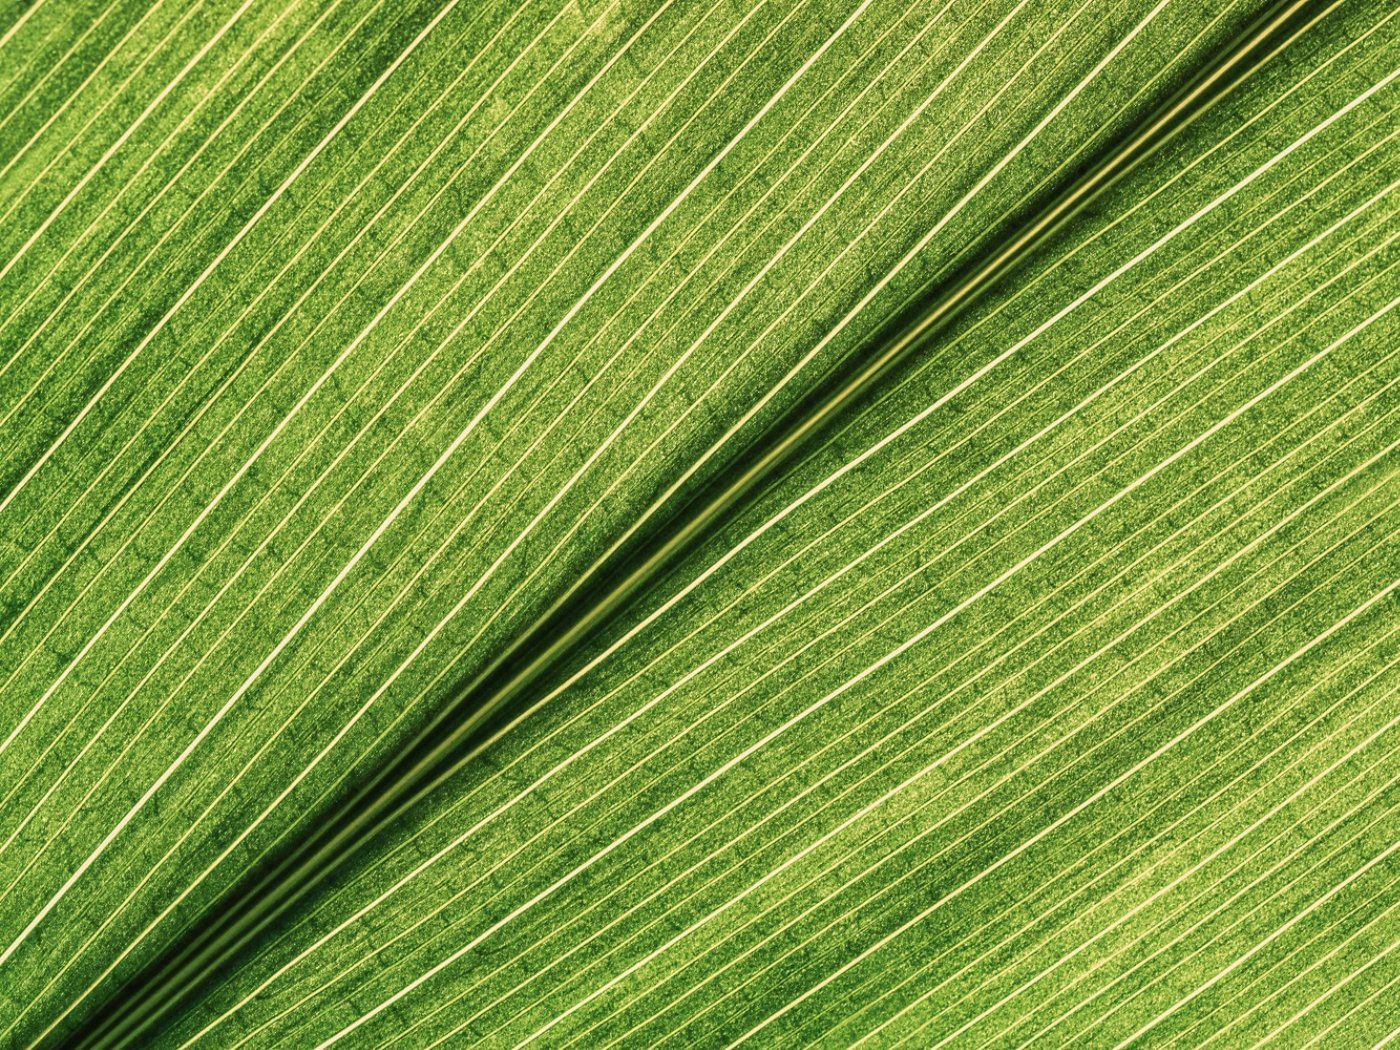 Green Leaf Close-up View